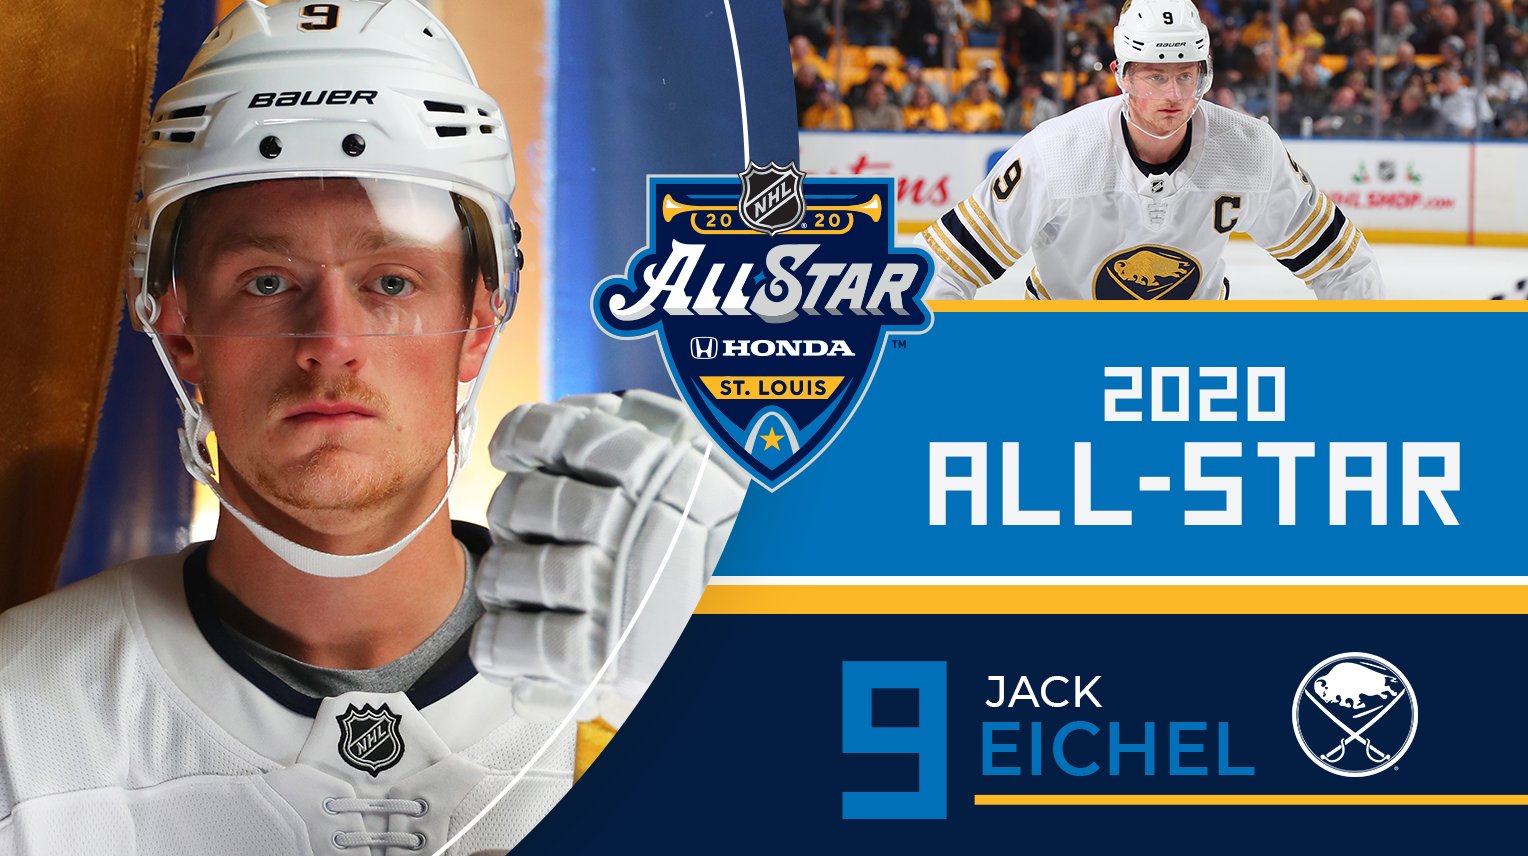 The NHL announced the rosters… MoreJack Eichel named to...